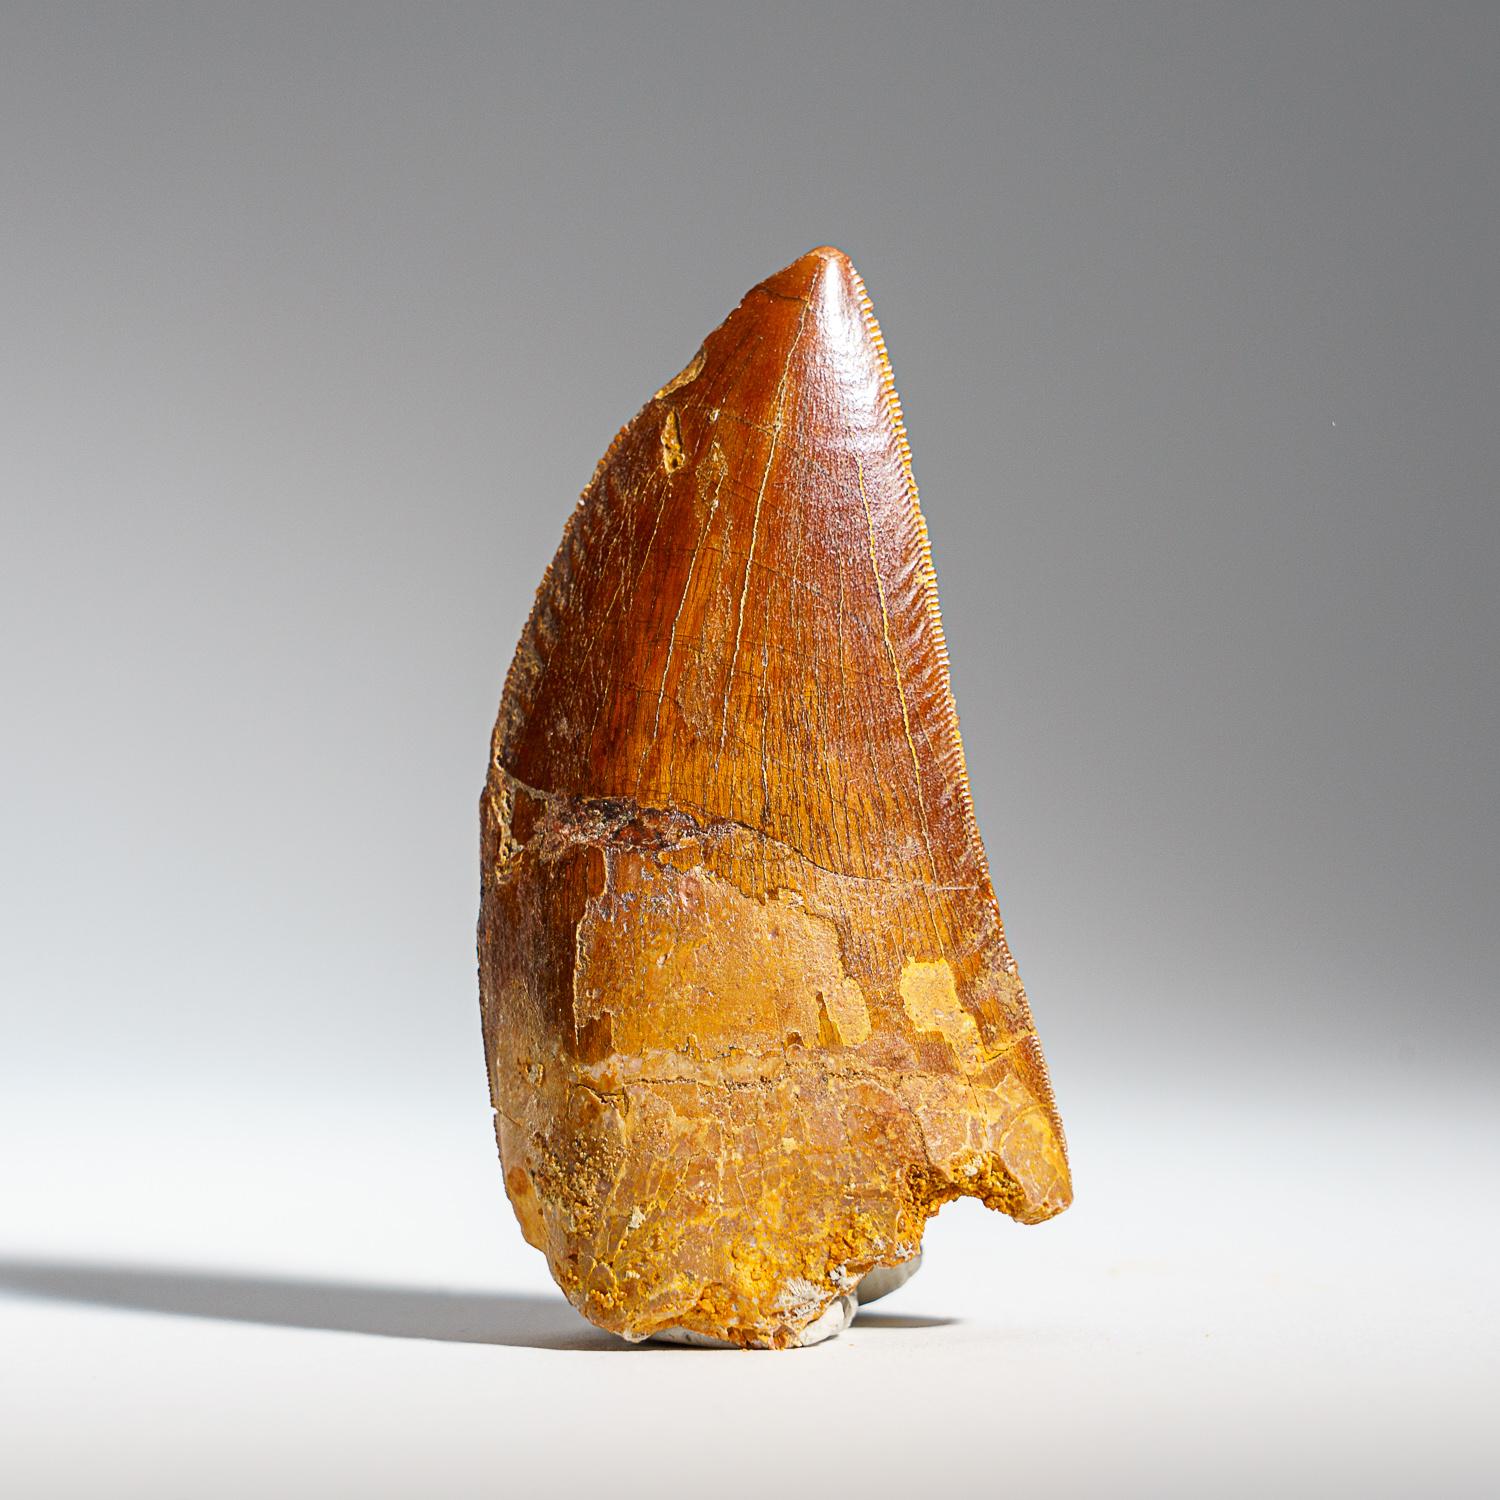 18th Century and Earlier Genuine Carcharodontosaurus Tooth in Display Box (37 grams) For Sale